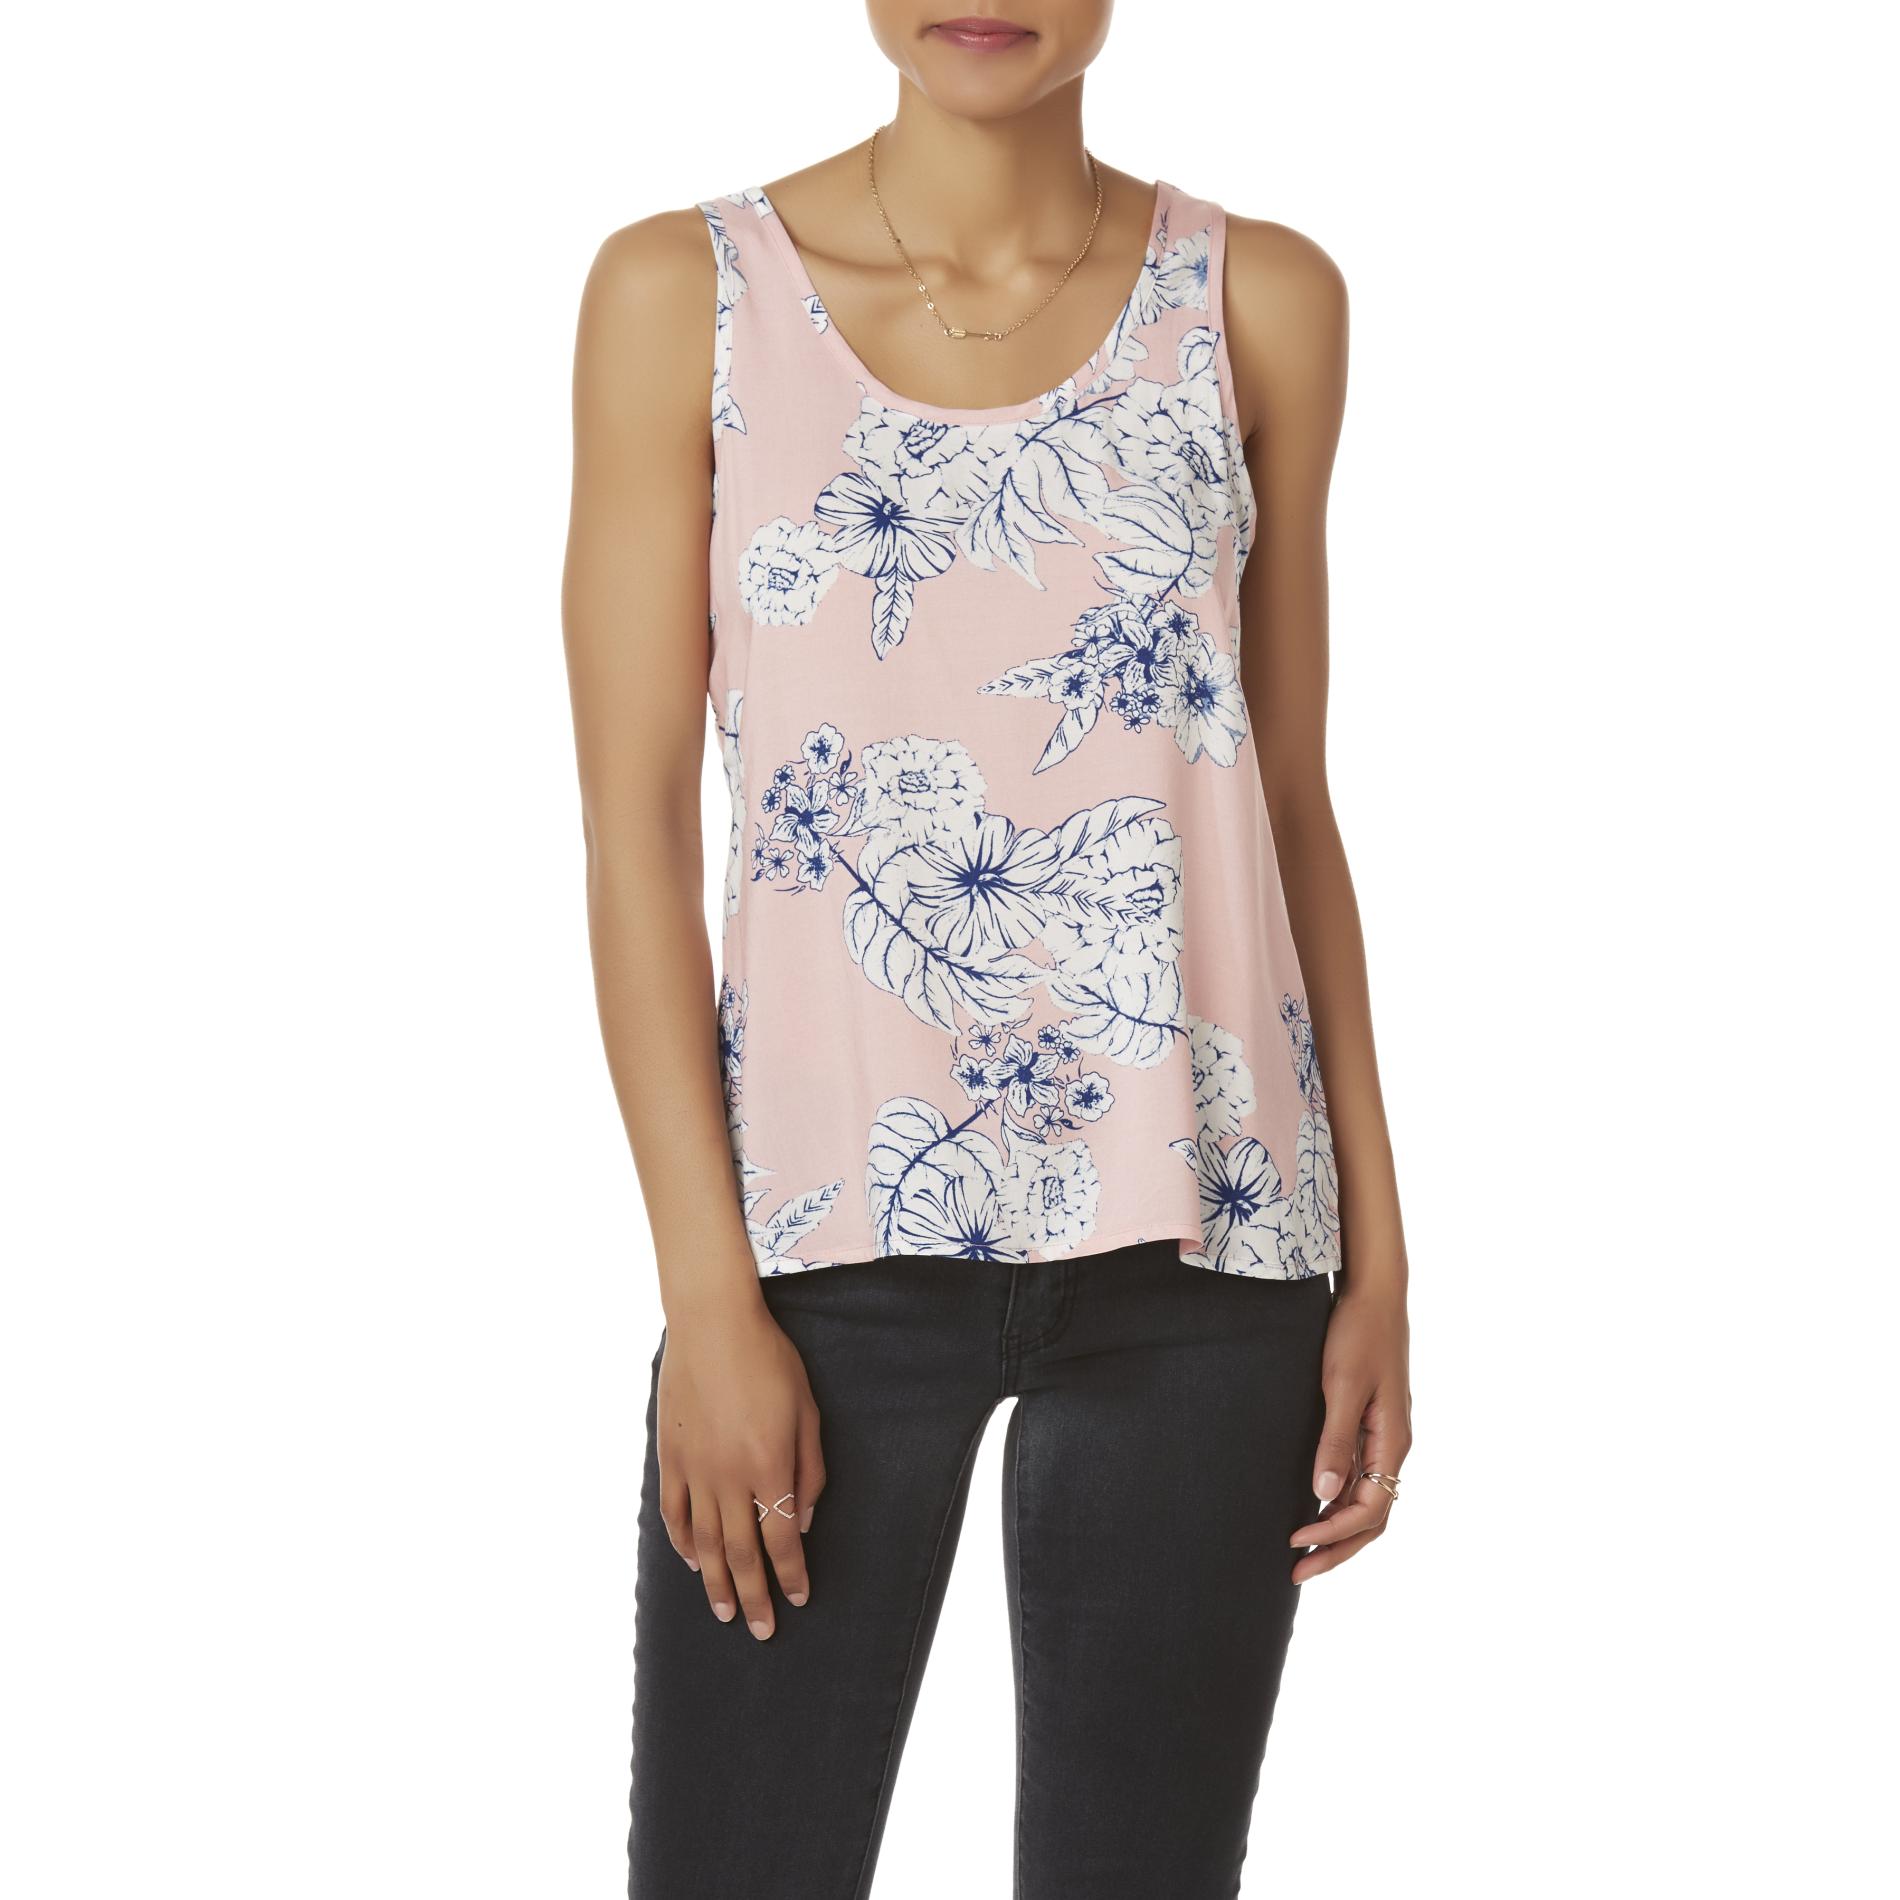 Simply Styled Women's Tank Top - Floral